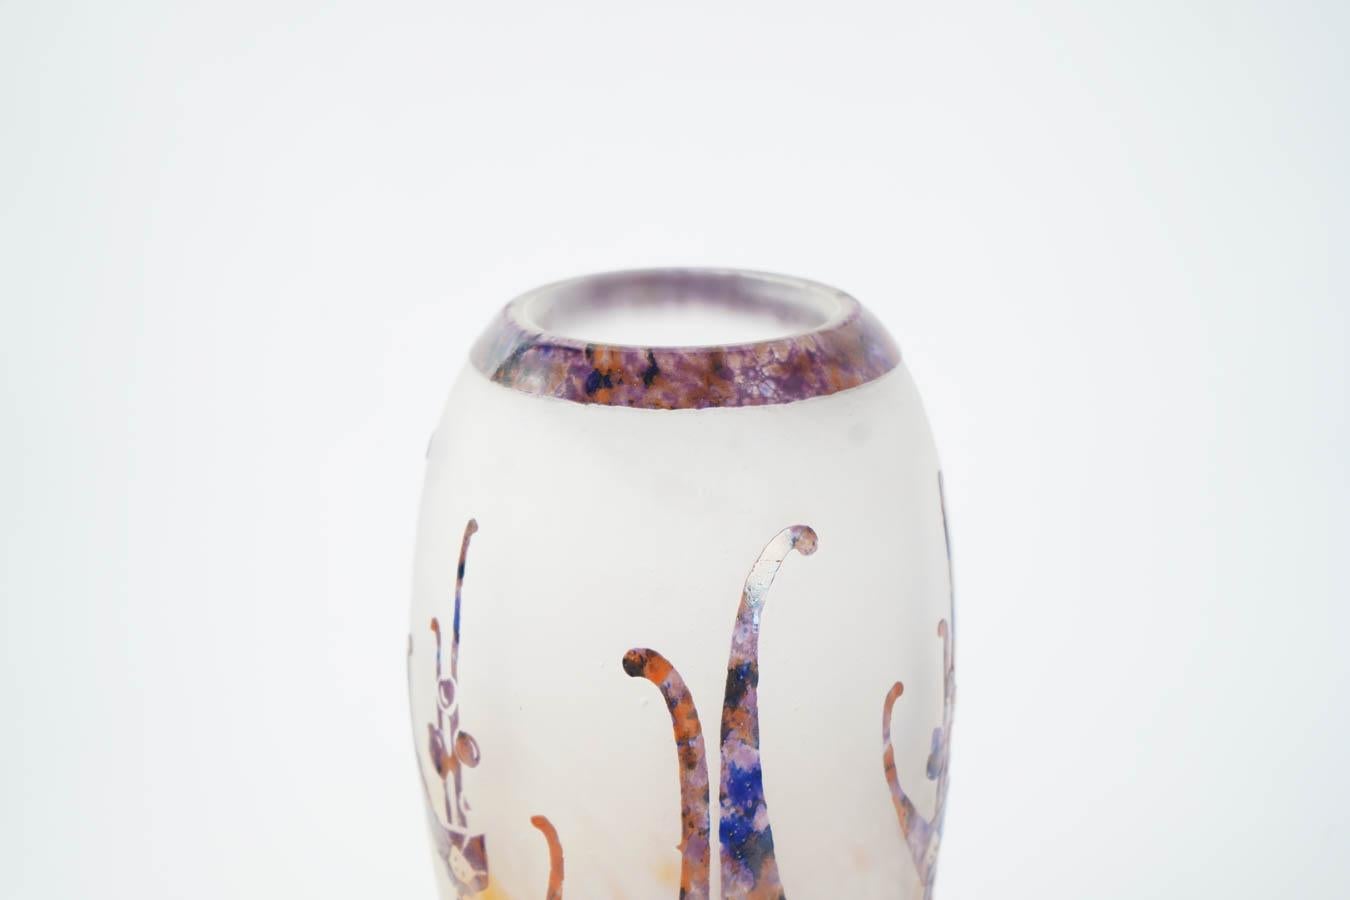 Mid-20th Century One of a Kind Glass Vase by Le Verre Francais, Signed on Base, France, 1930s